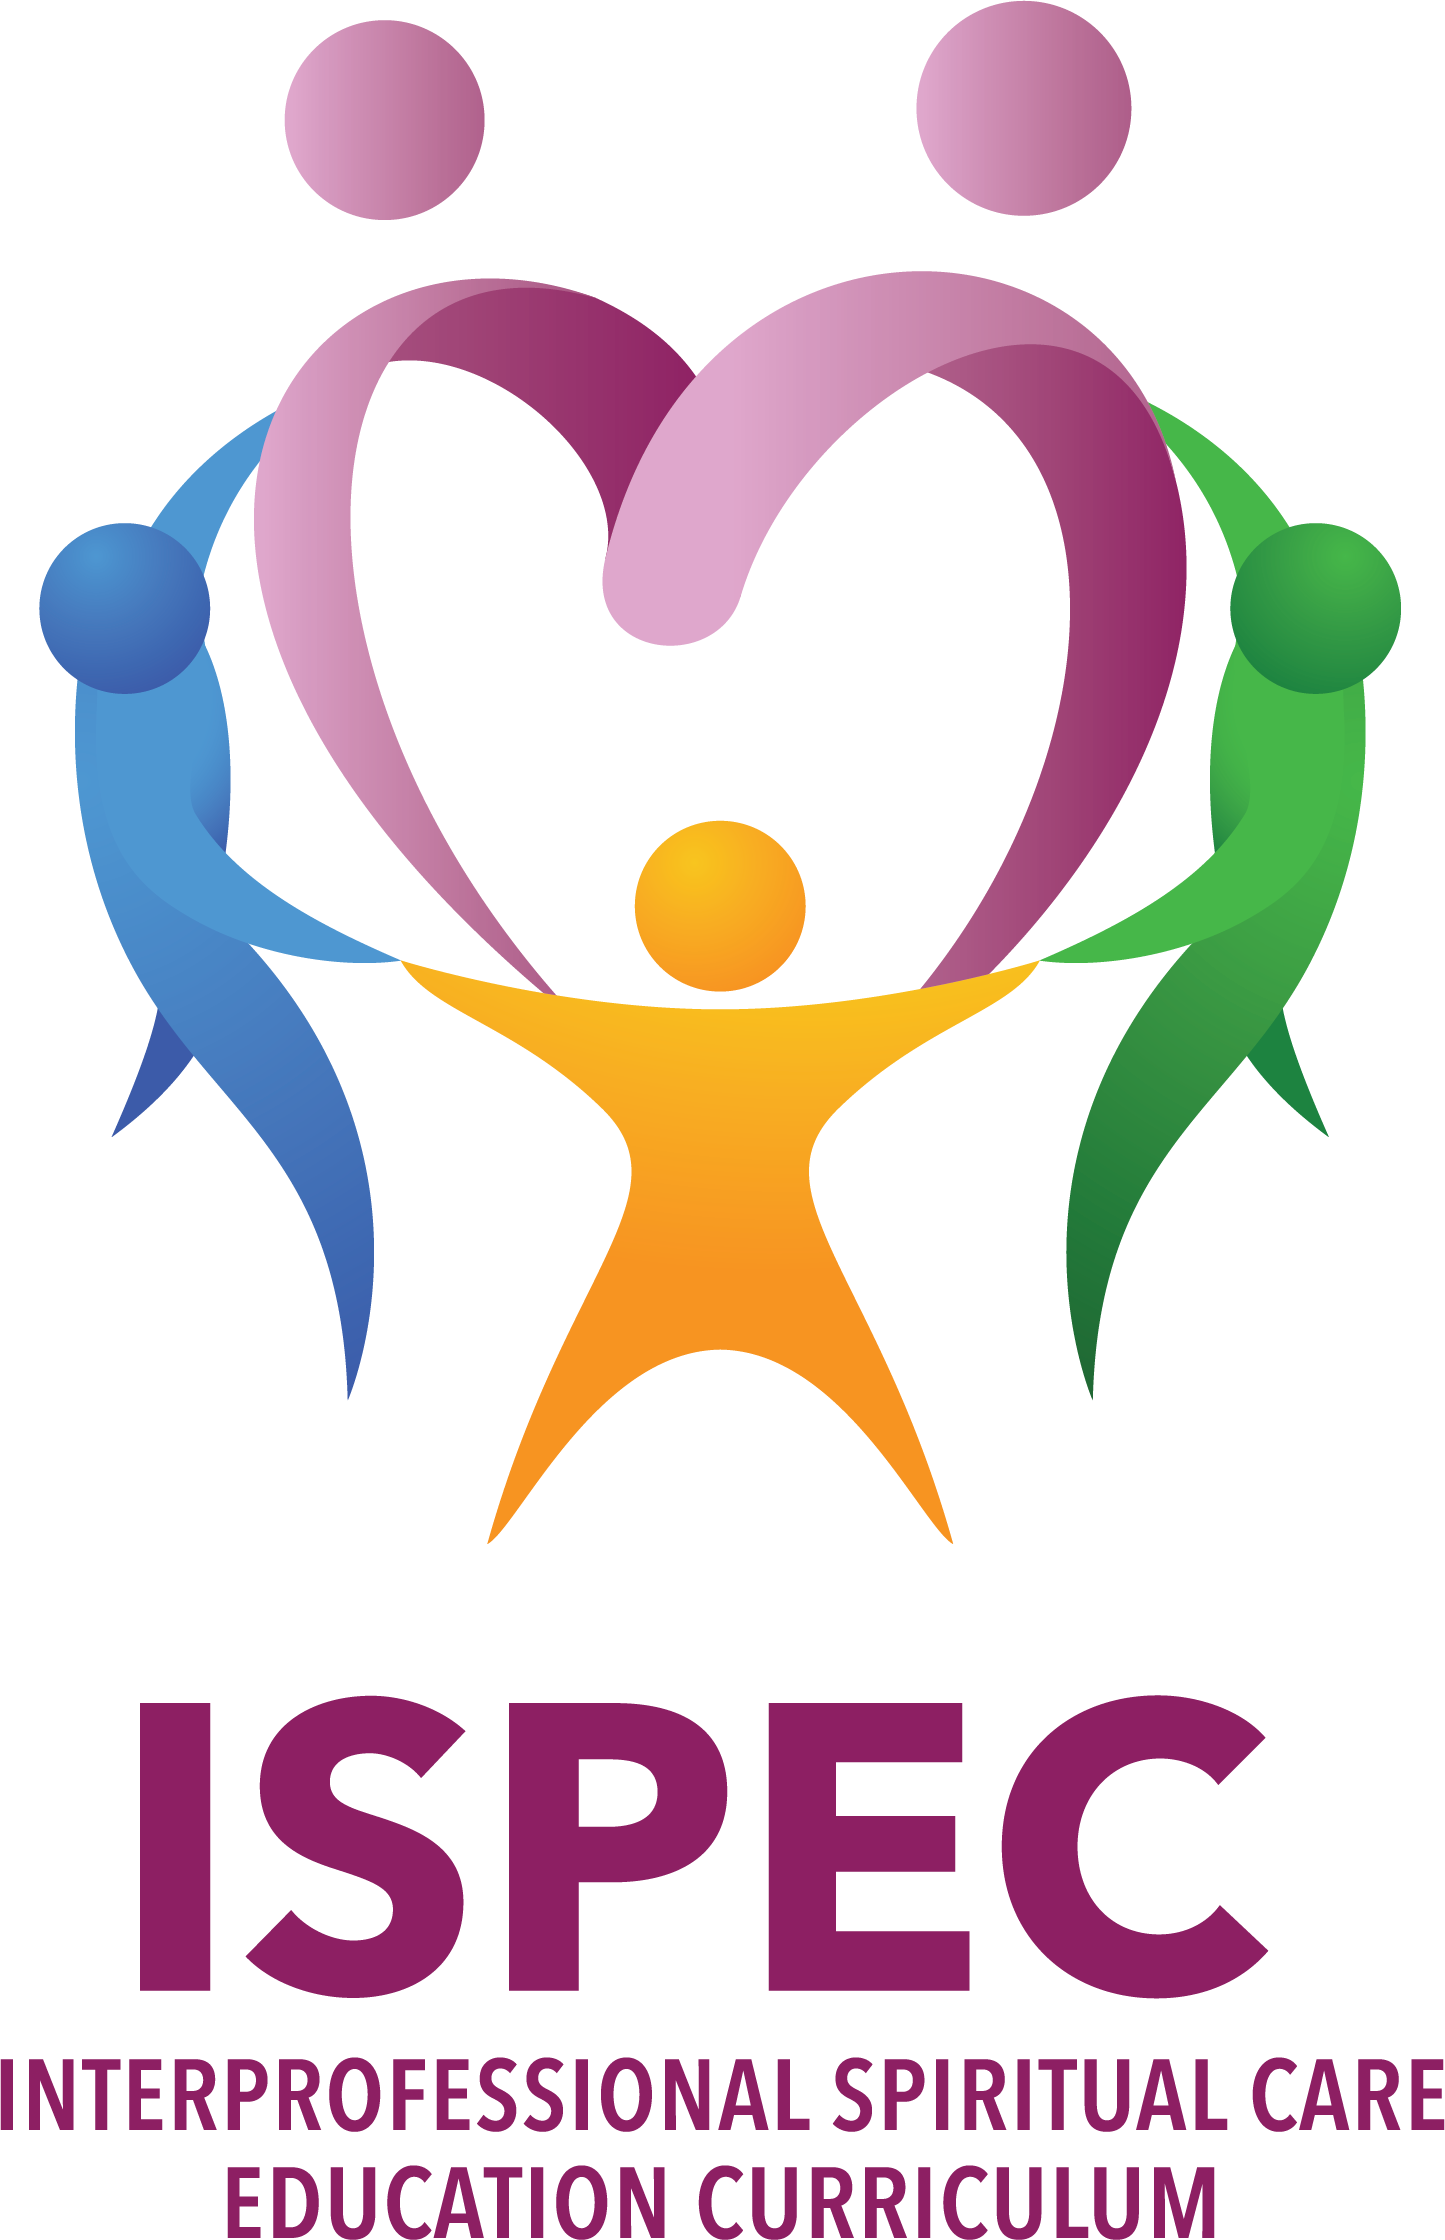 ISPEC Train the Trainer 2018 On-Campus Housing